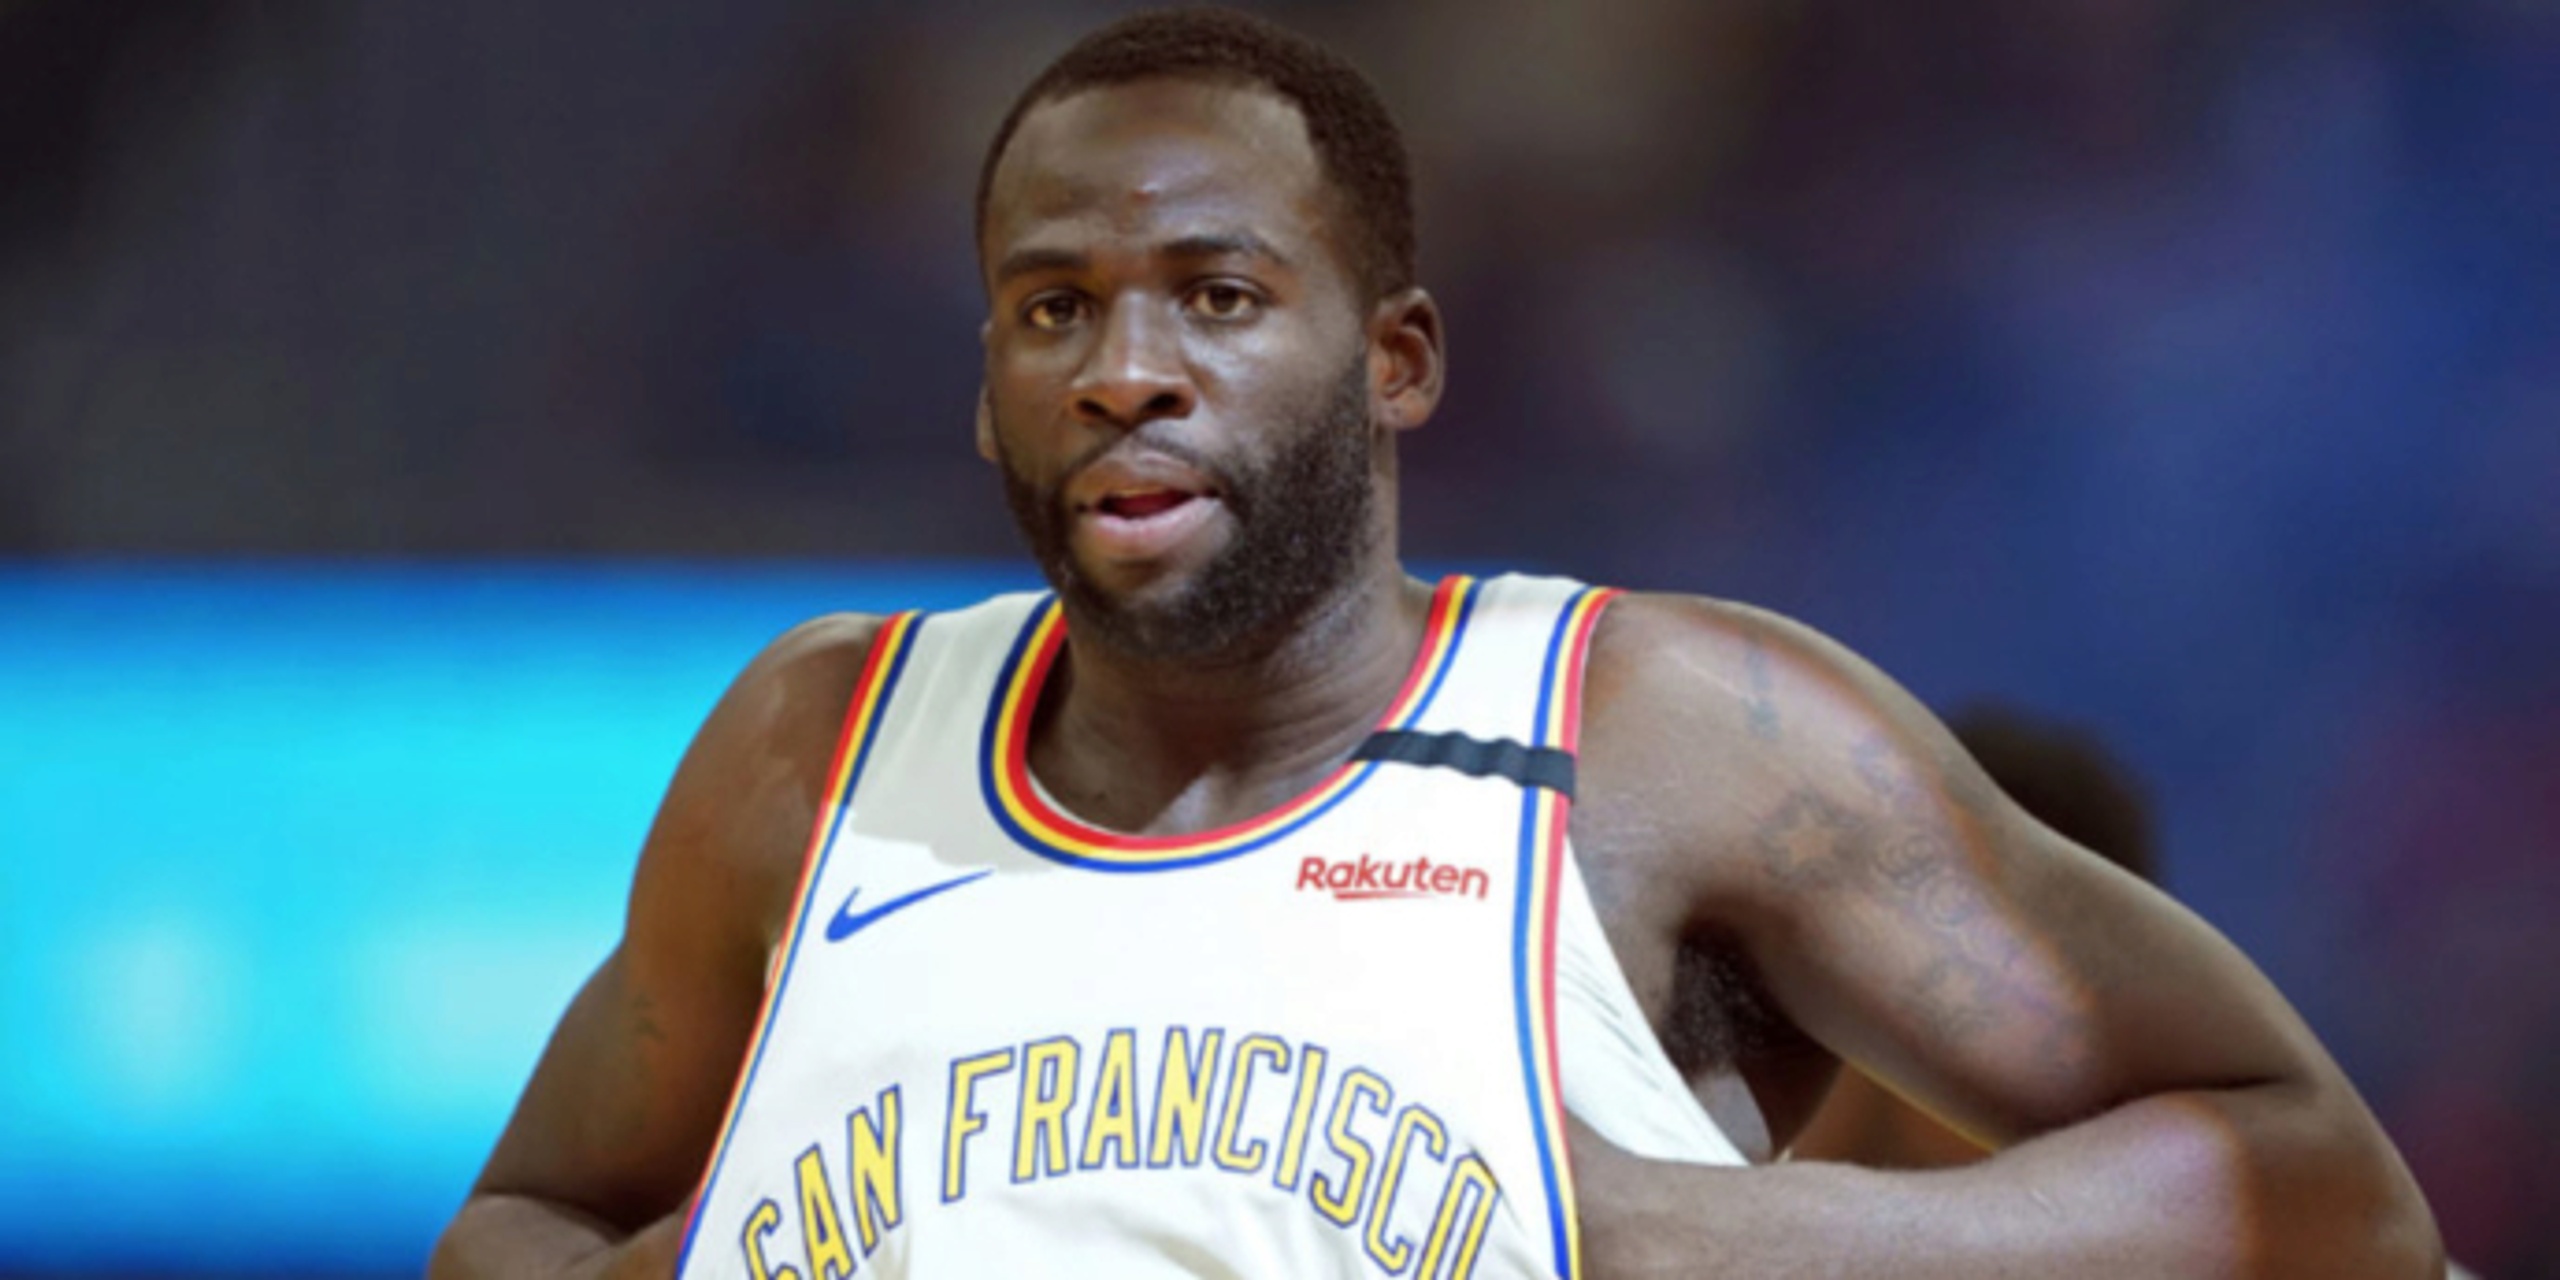 Draymond Green admits struggles with conditioning in debut